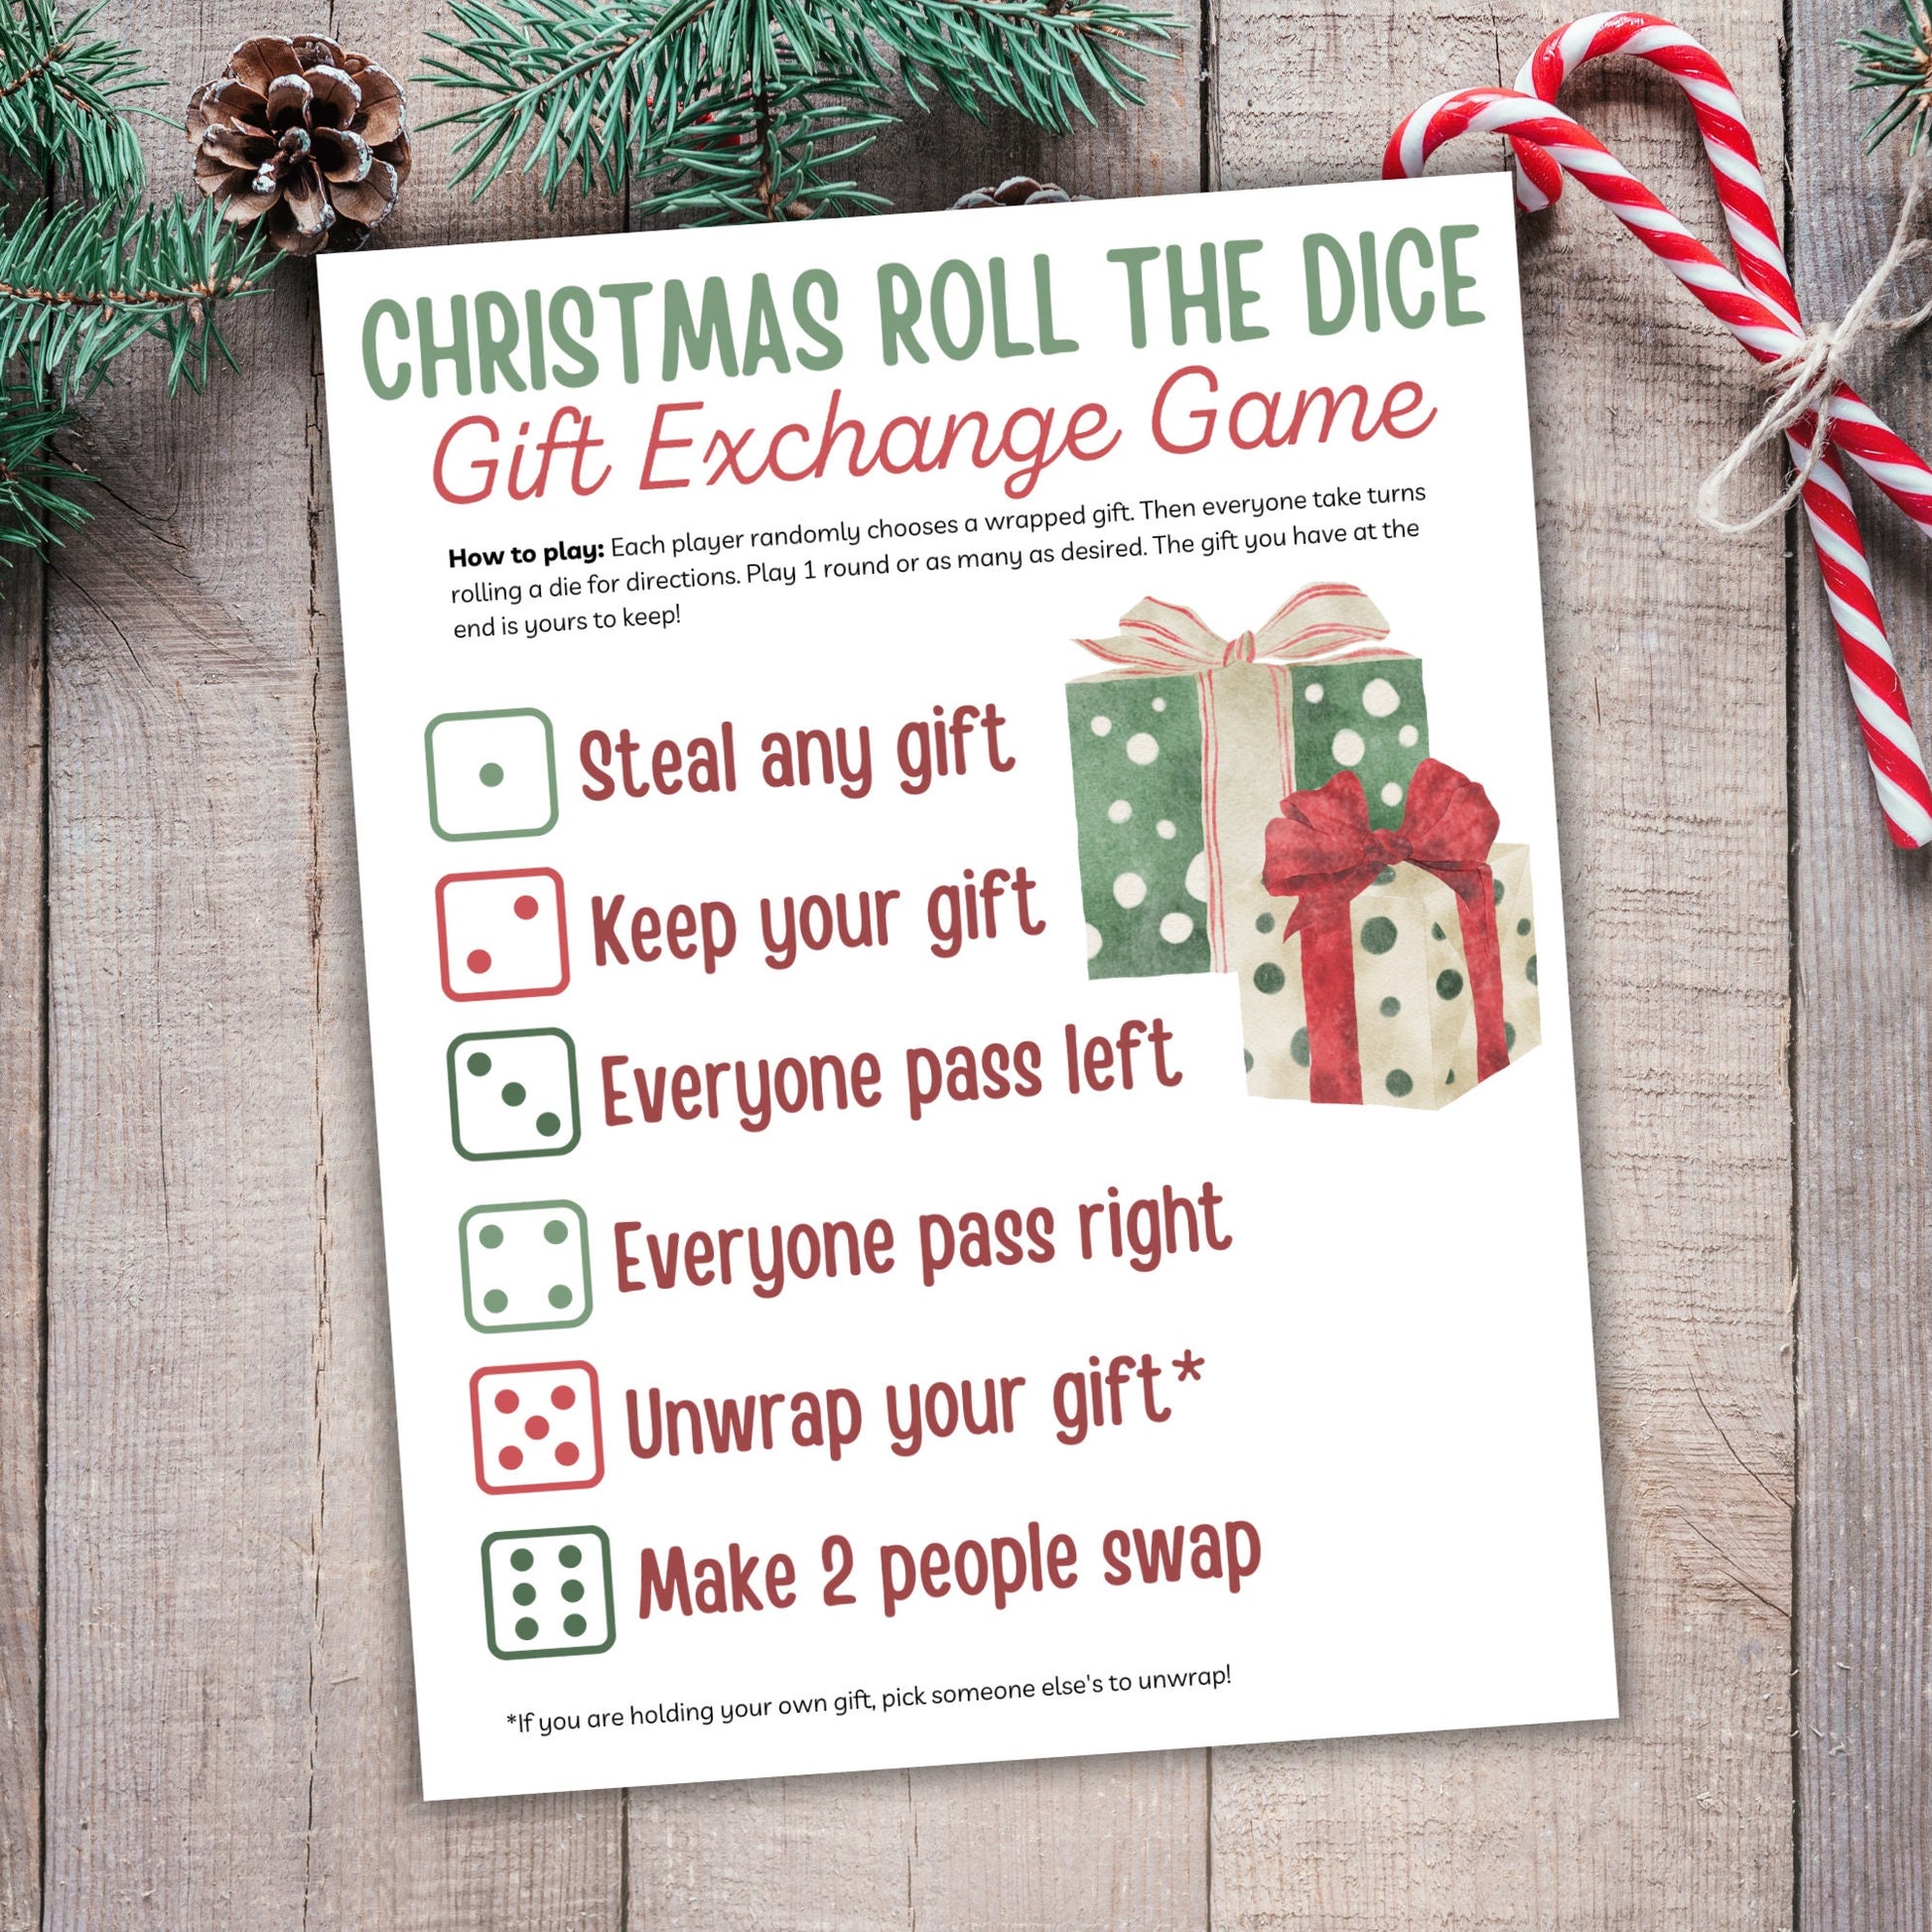 Christmas Gift Exchange Dice Game, Holiday Christmas Party Games, Roll the Dice Game, White Elephant Gift Exchange Game, Printable Dice Game